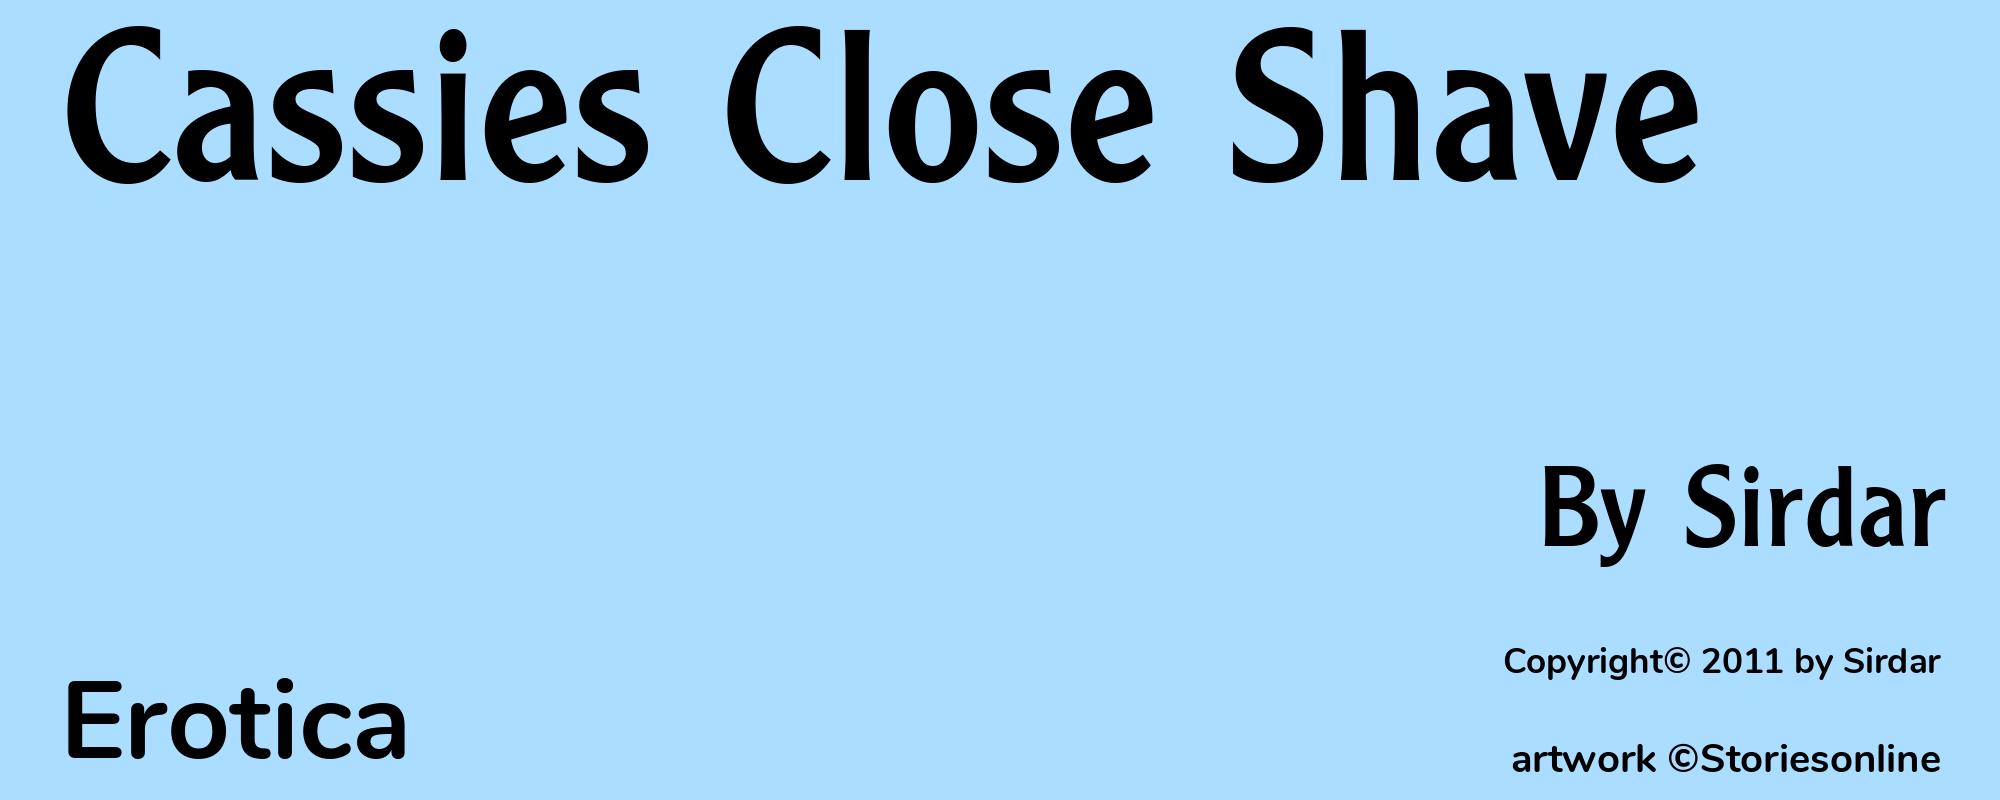 Cassies Close Shave - Cover